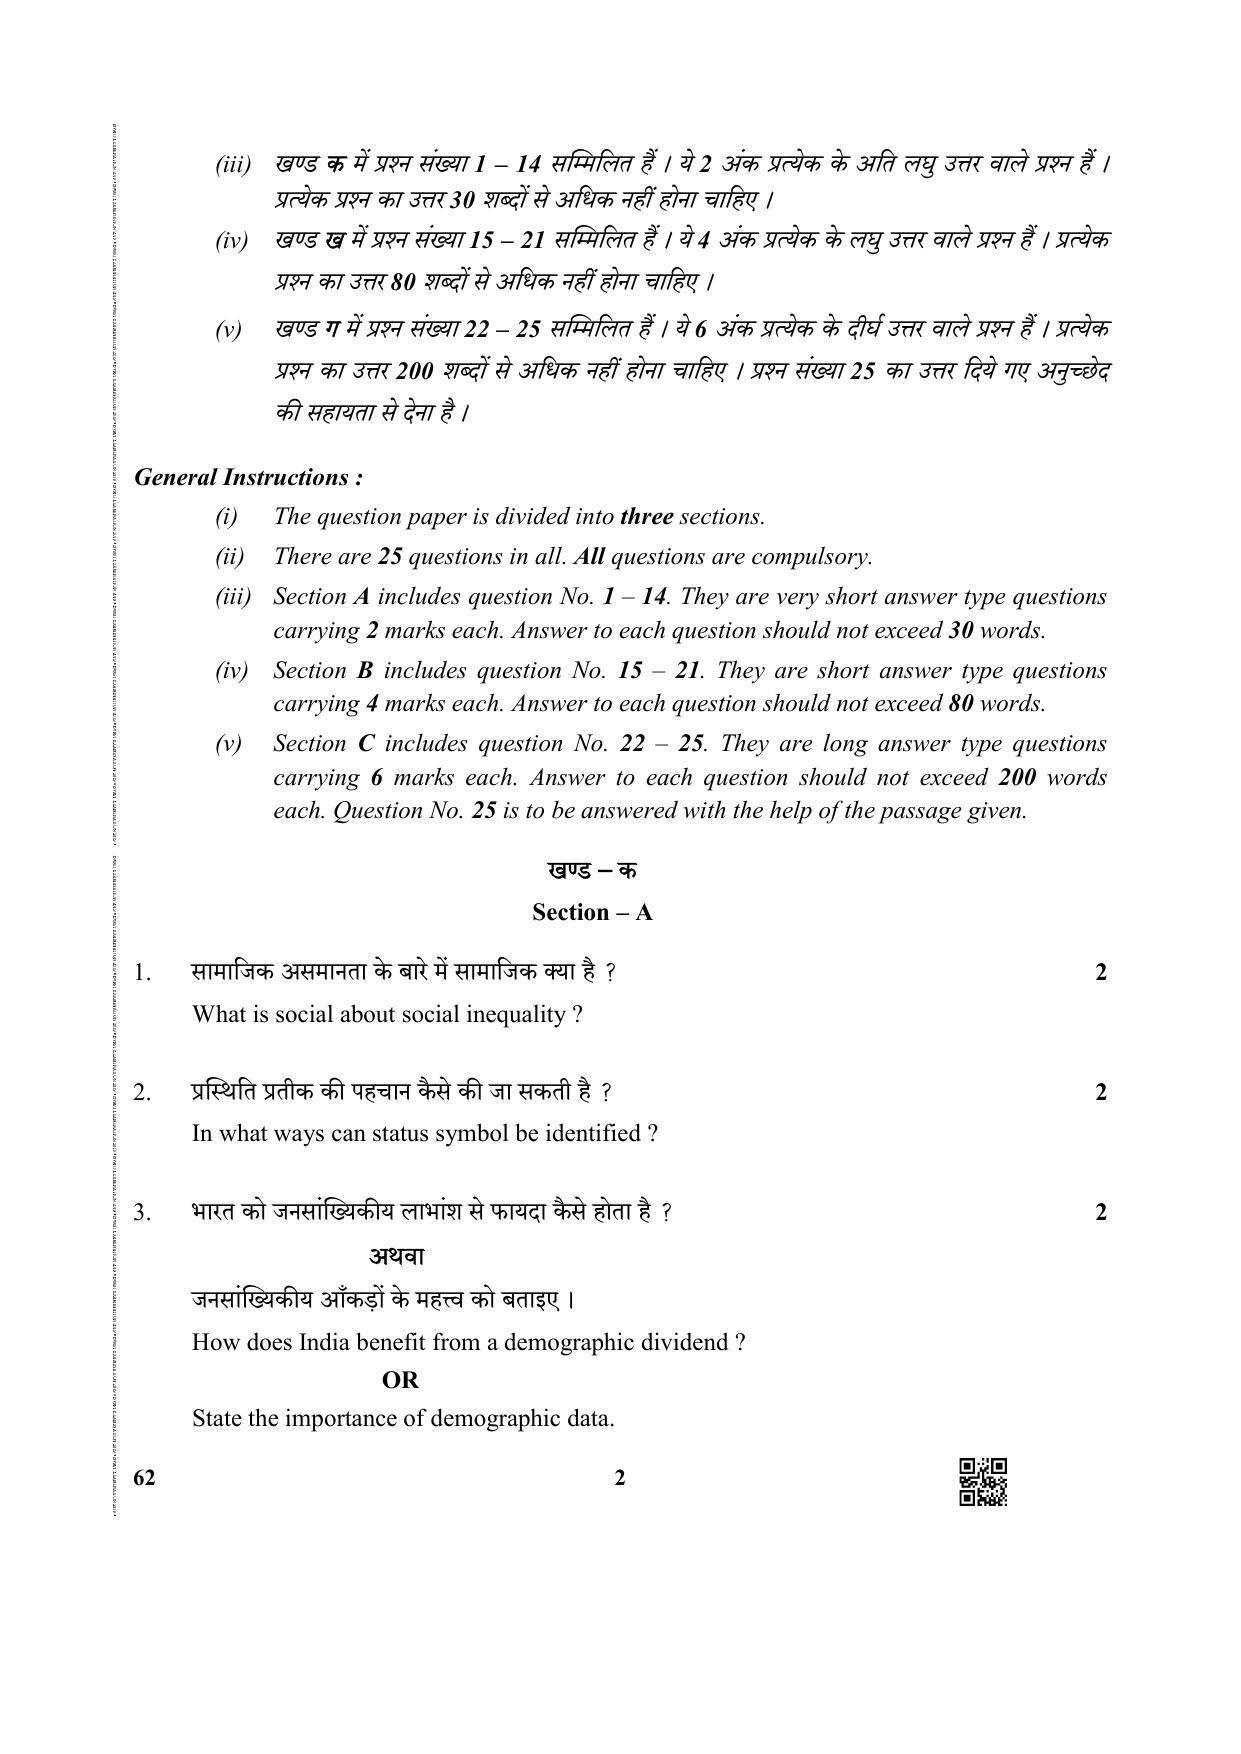 CBSE Class 12 62 (Sociology) 2019 Question Paper - Page 2